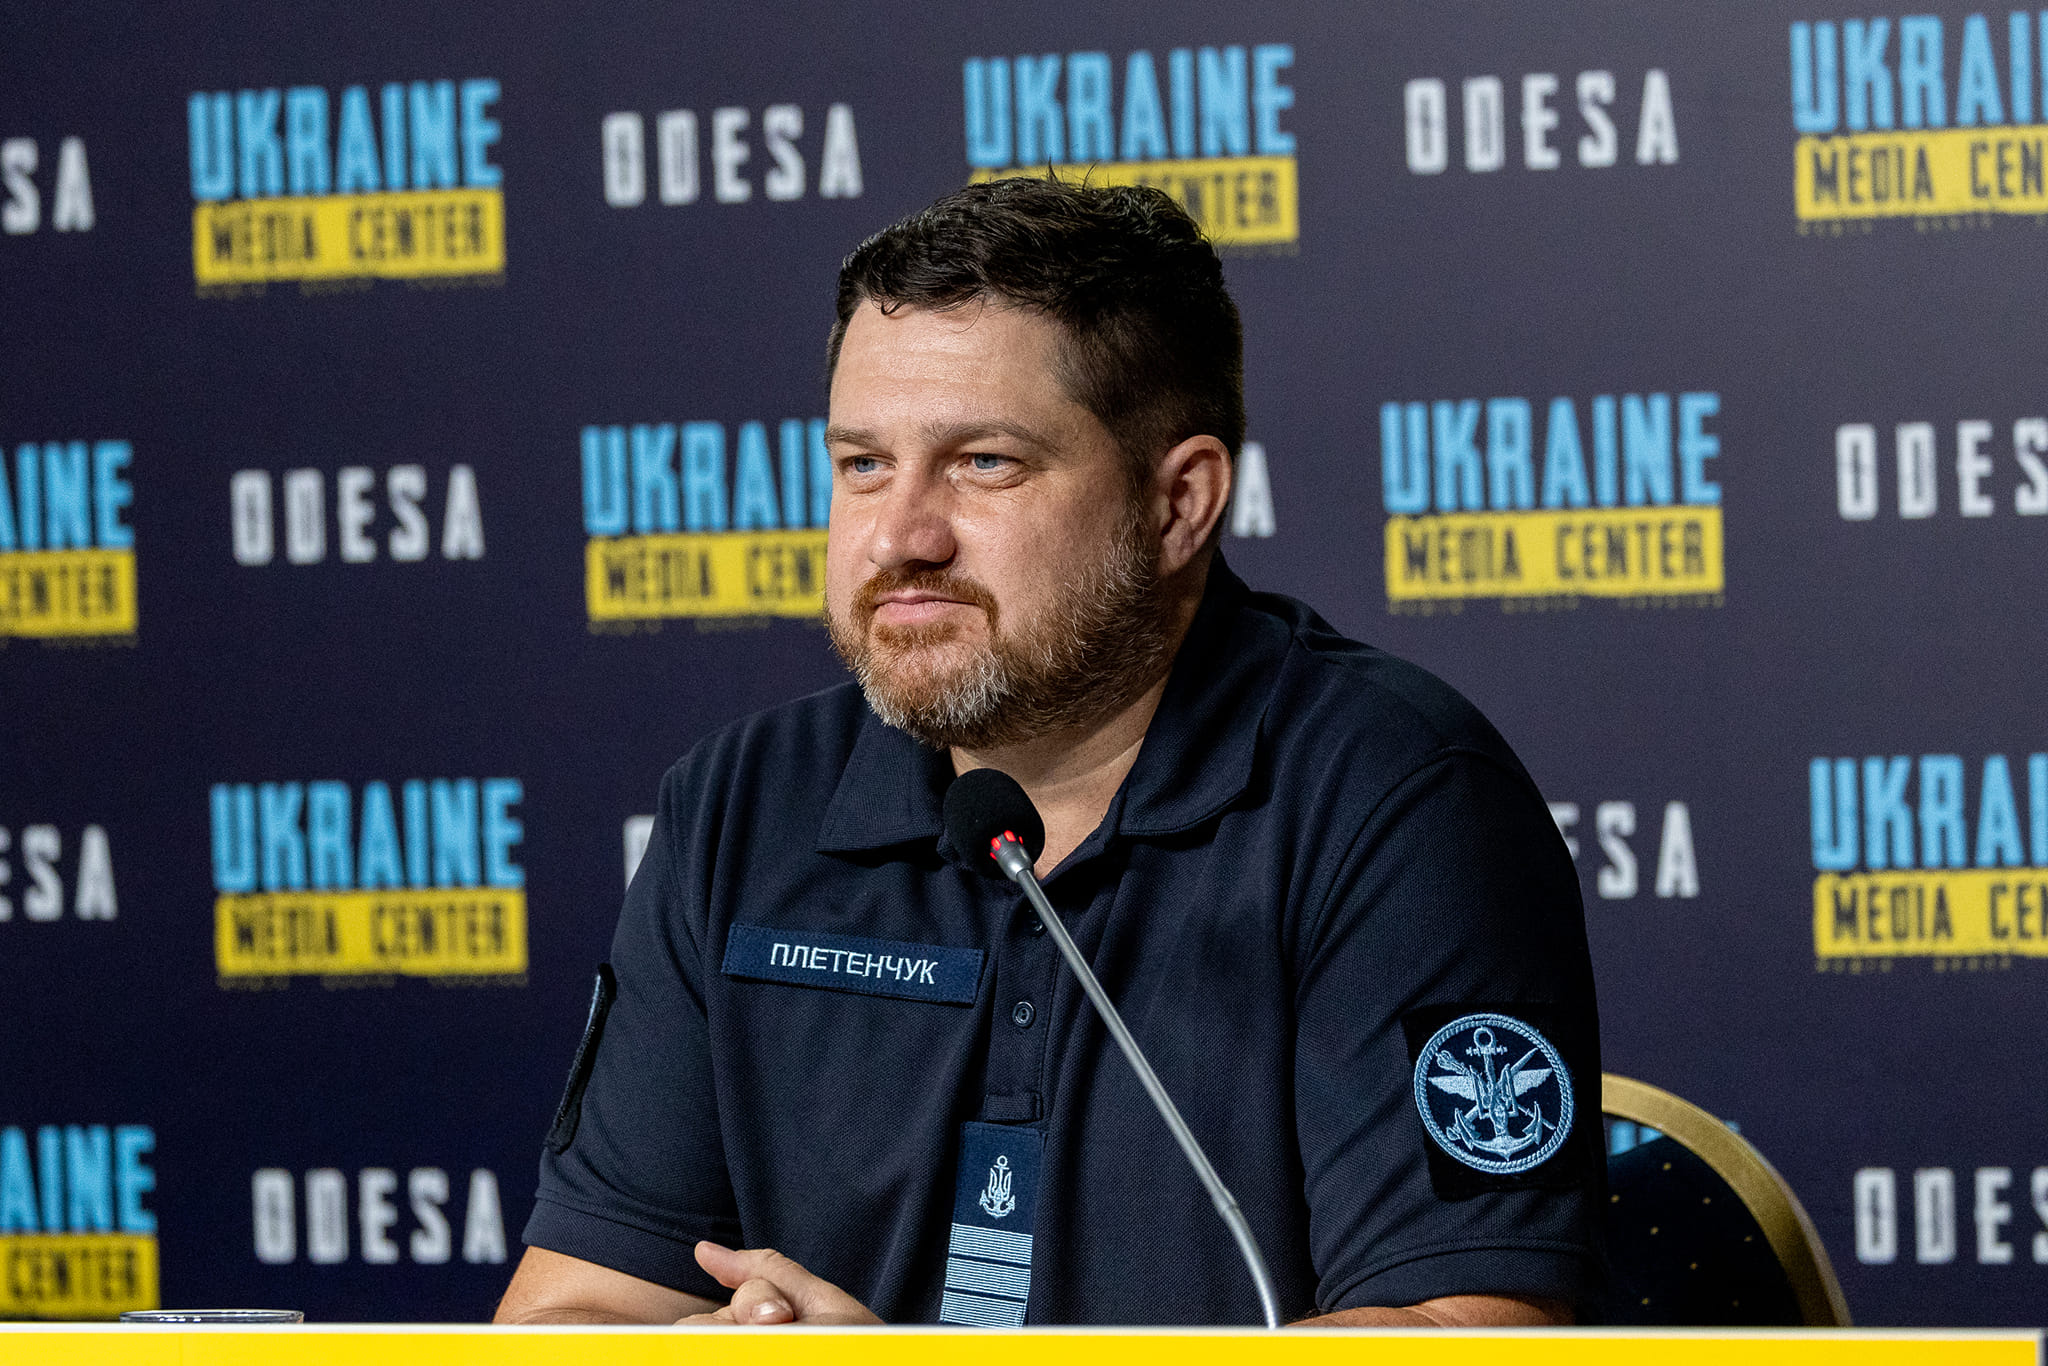 Dmytro Pletenchuk: In occupied Crimea, Russia no longer has any missile carriers